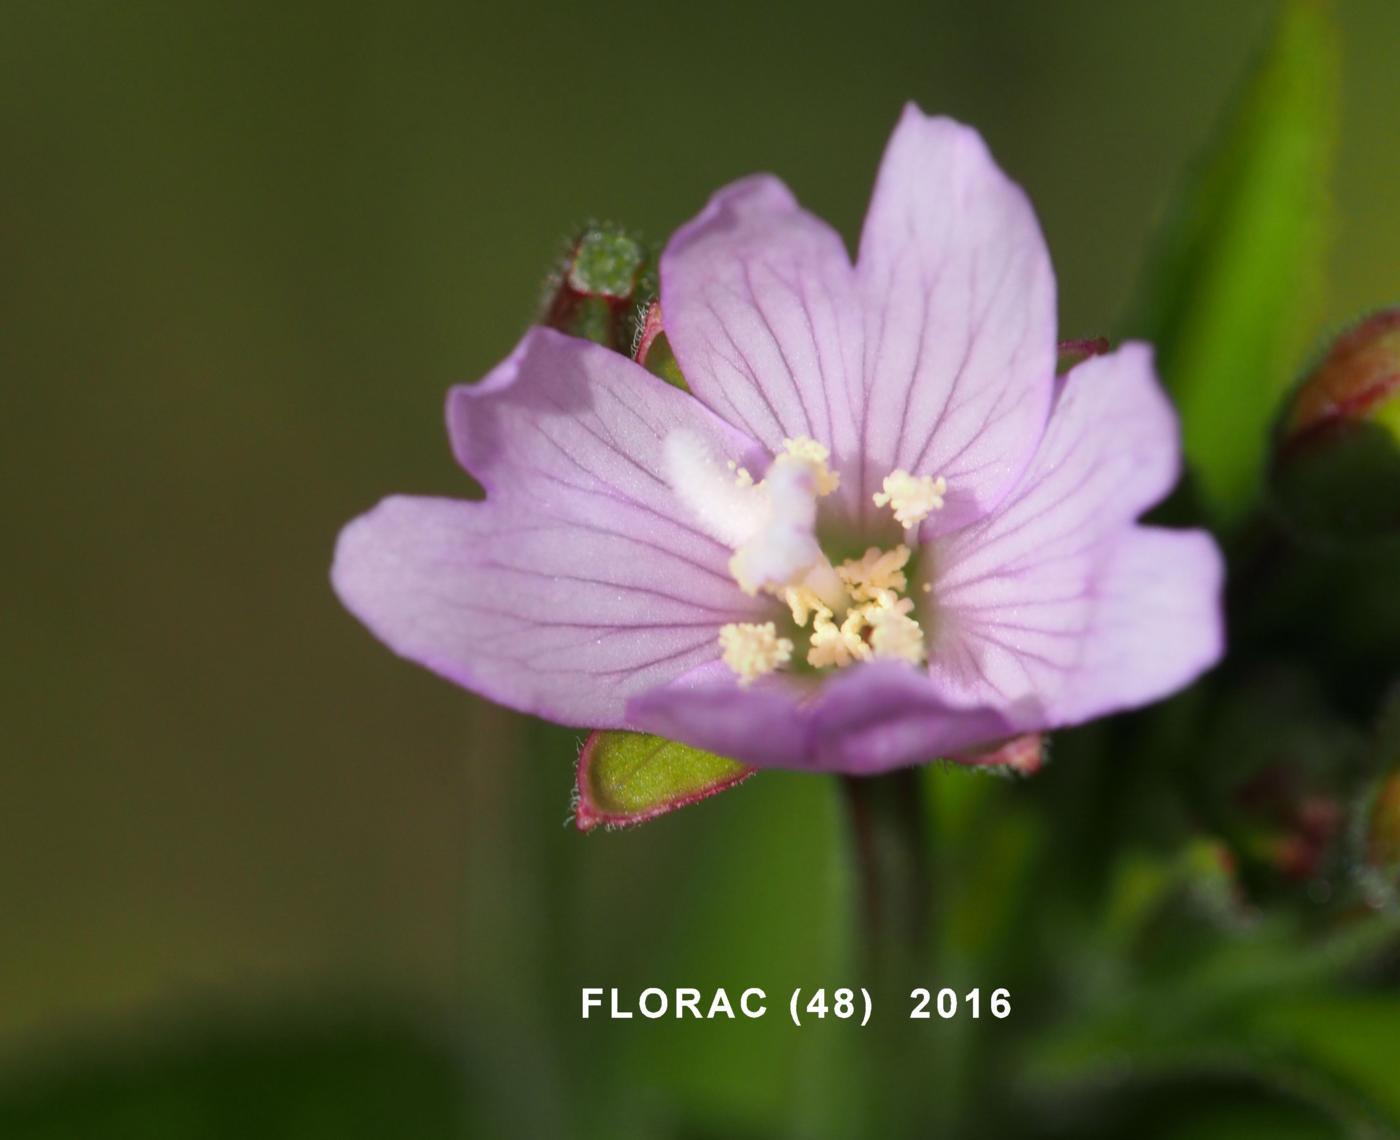 Willow-herb, Small flowered flower